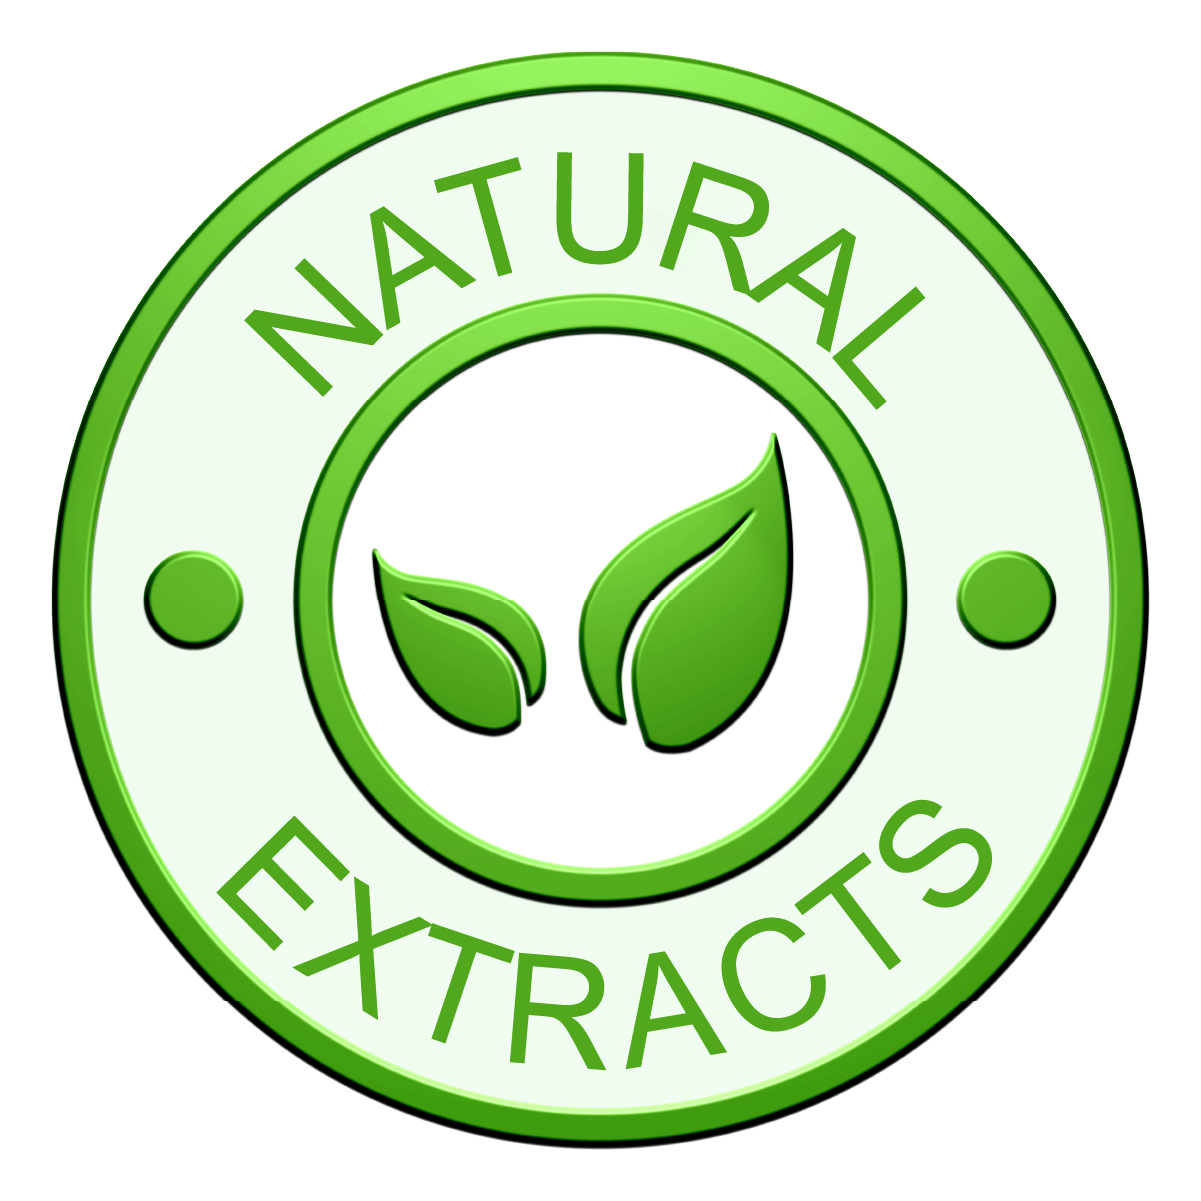 natural extracts